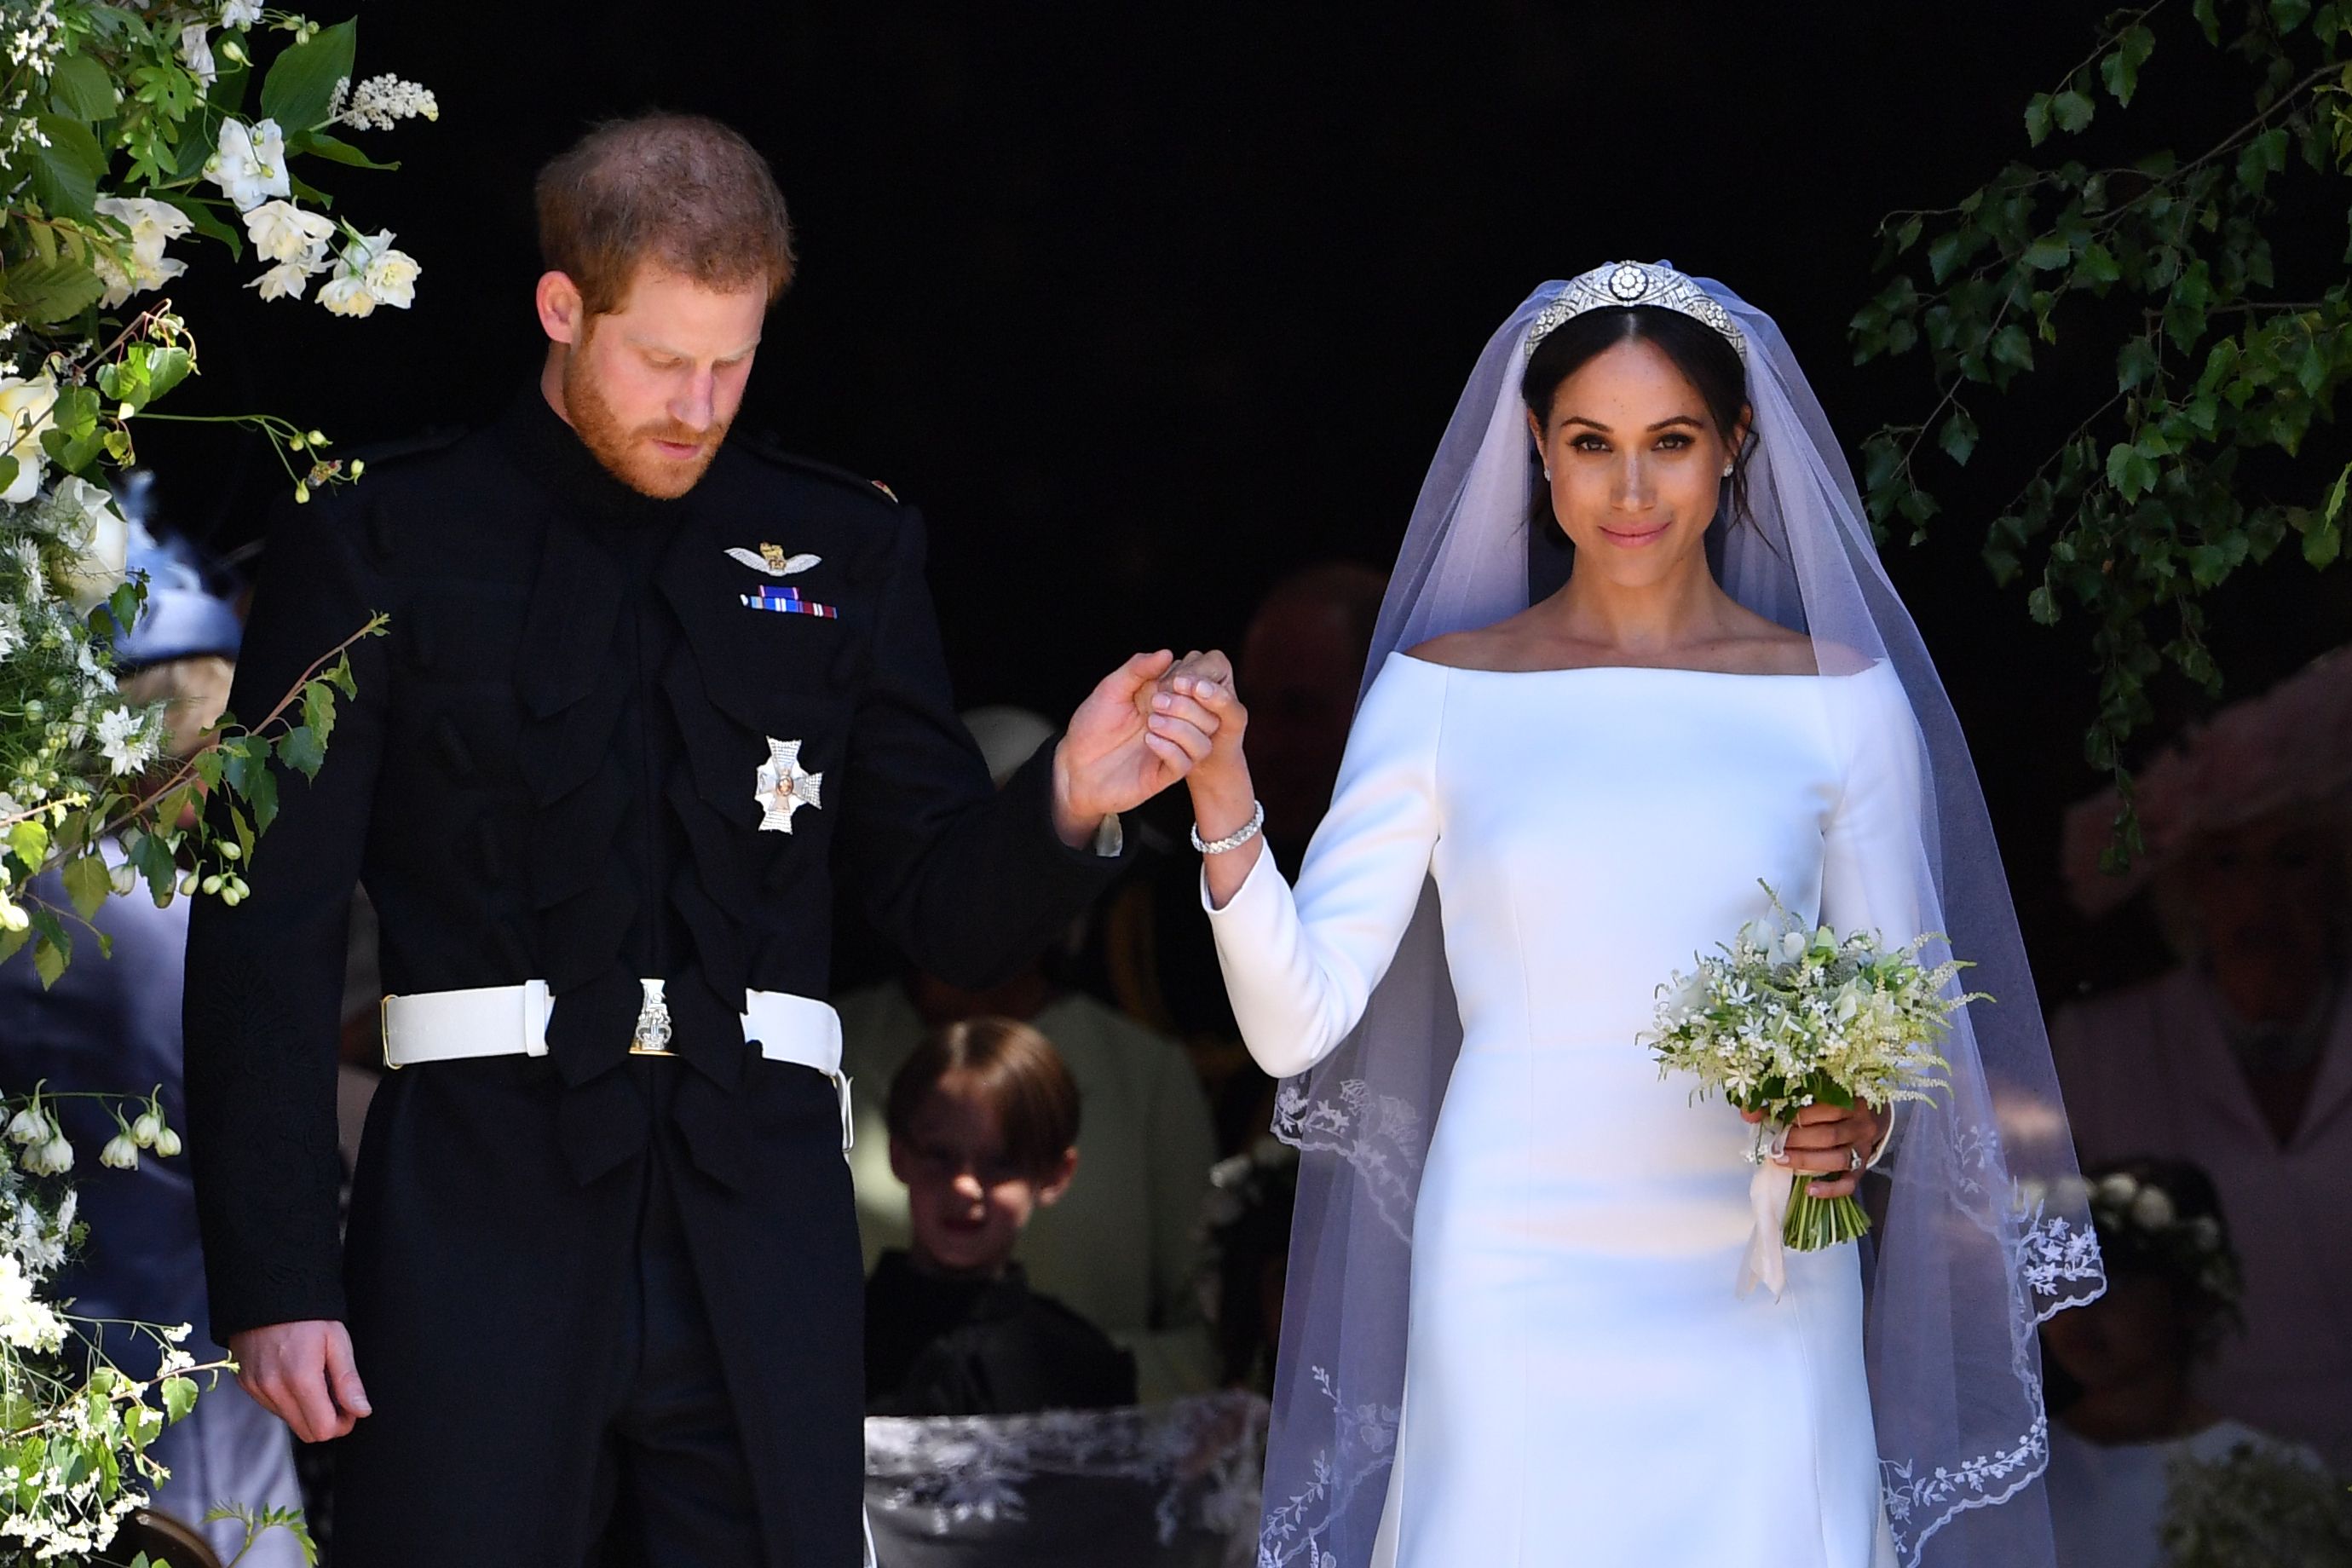 The Queen Wanted Meghan Markle to Wear an Off-White Wedding Dress